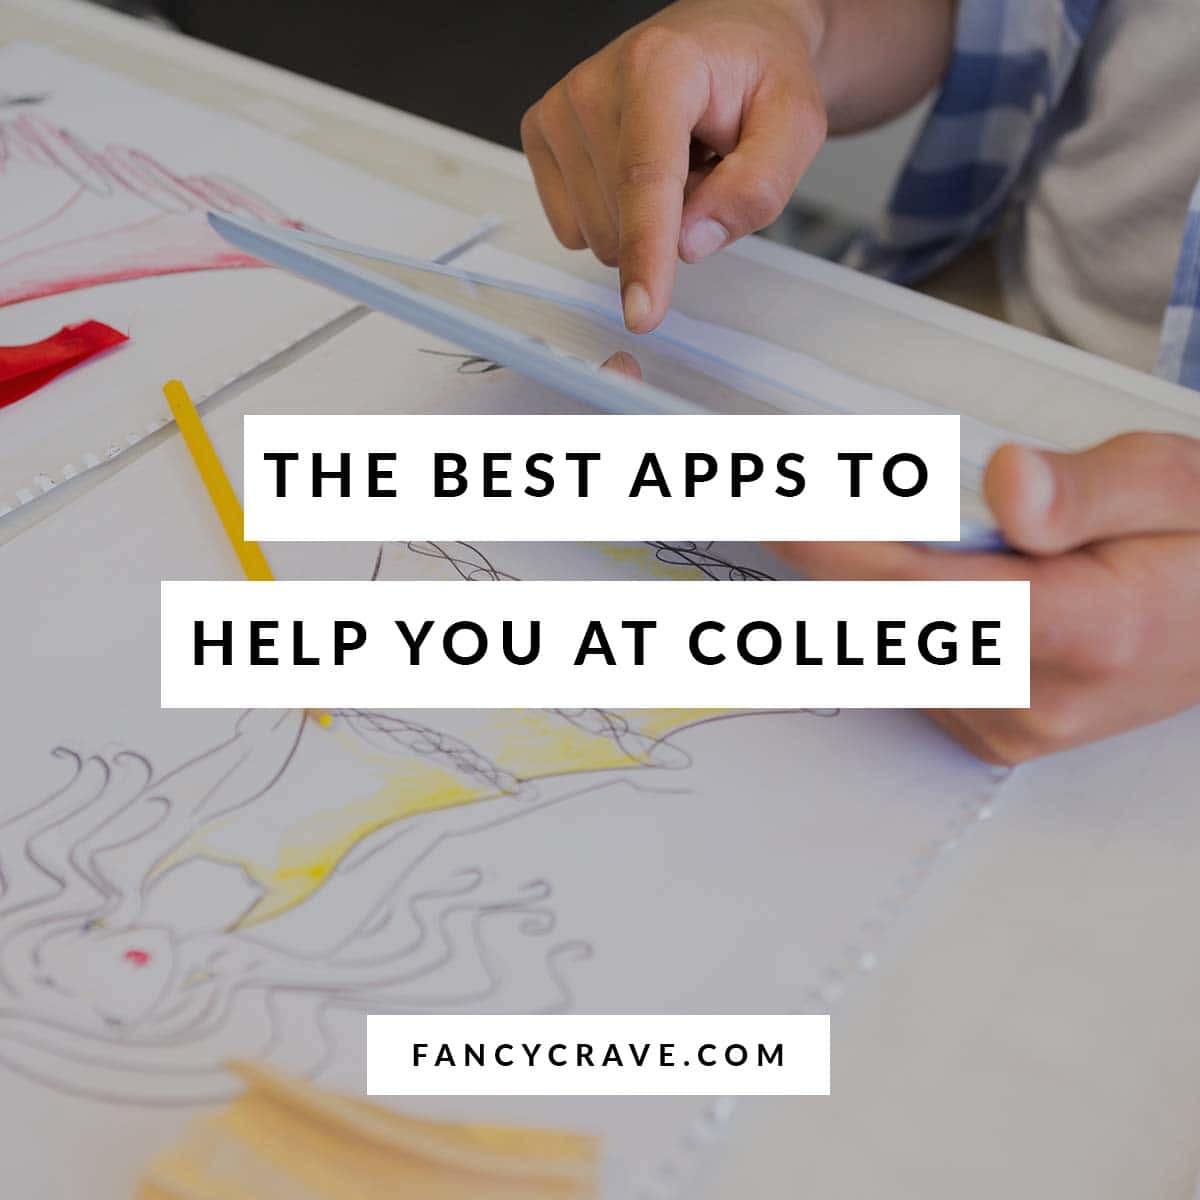 The Best Apps to Help You at College